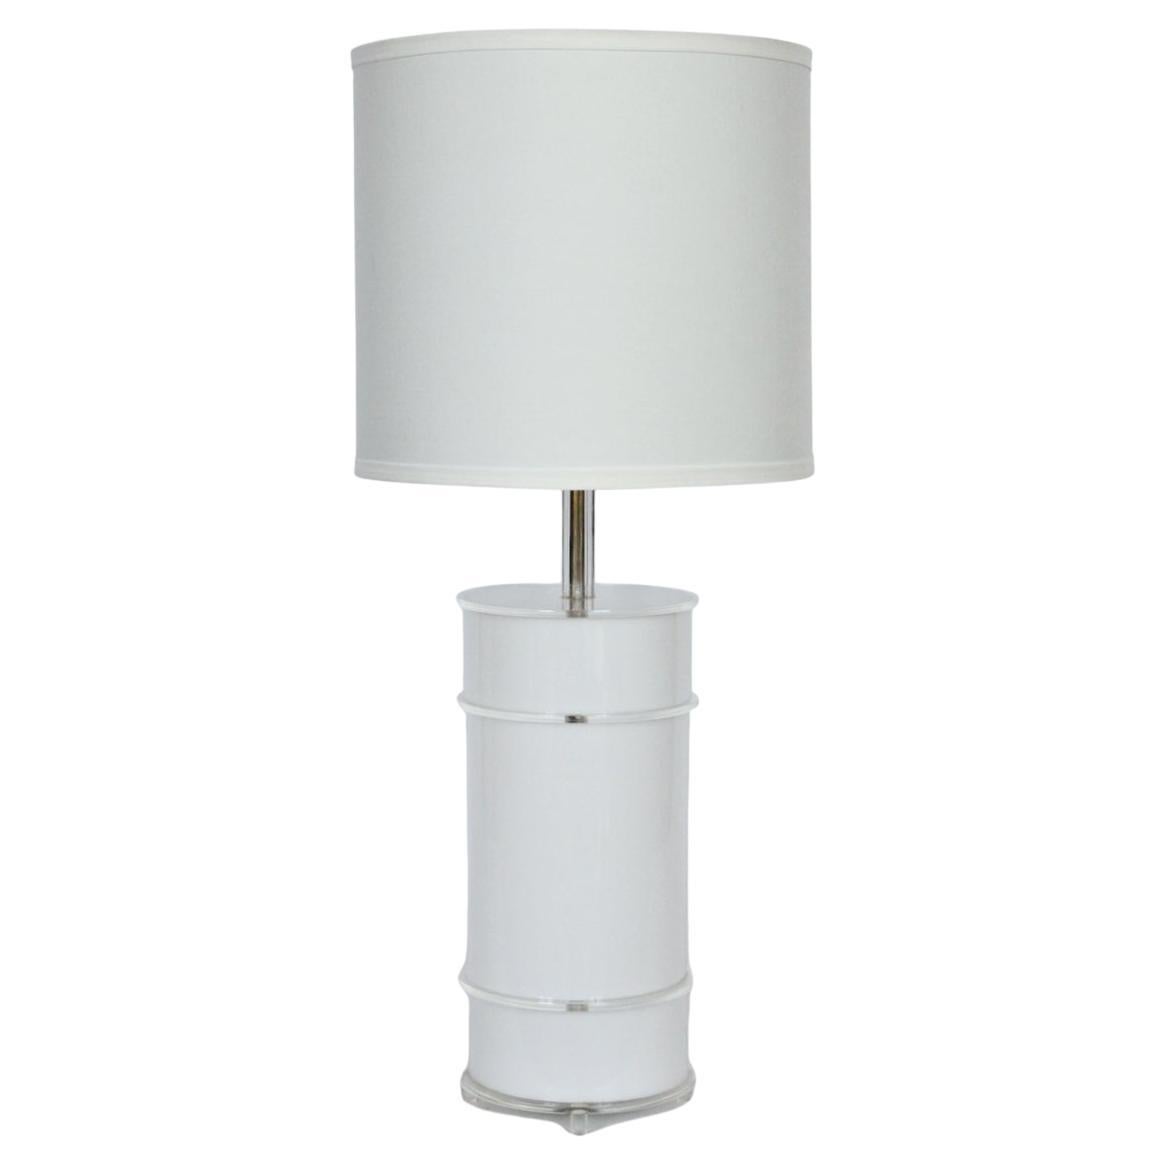 Neal Small Style White Lucite Table Lamp with Clear Lucite Detail, 1970s For Sale